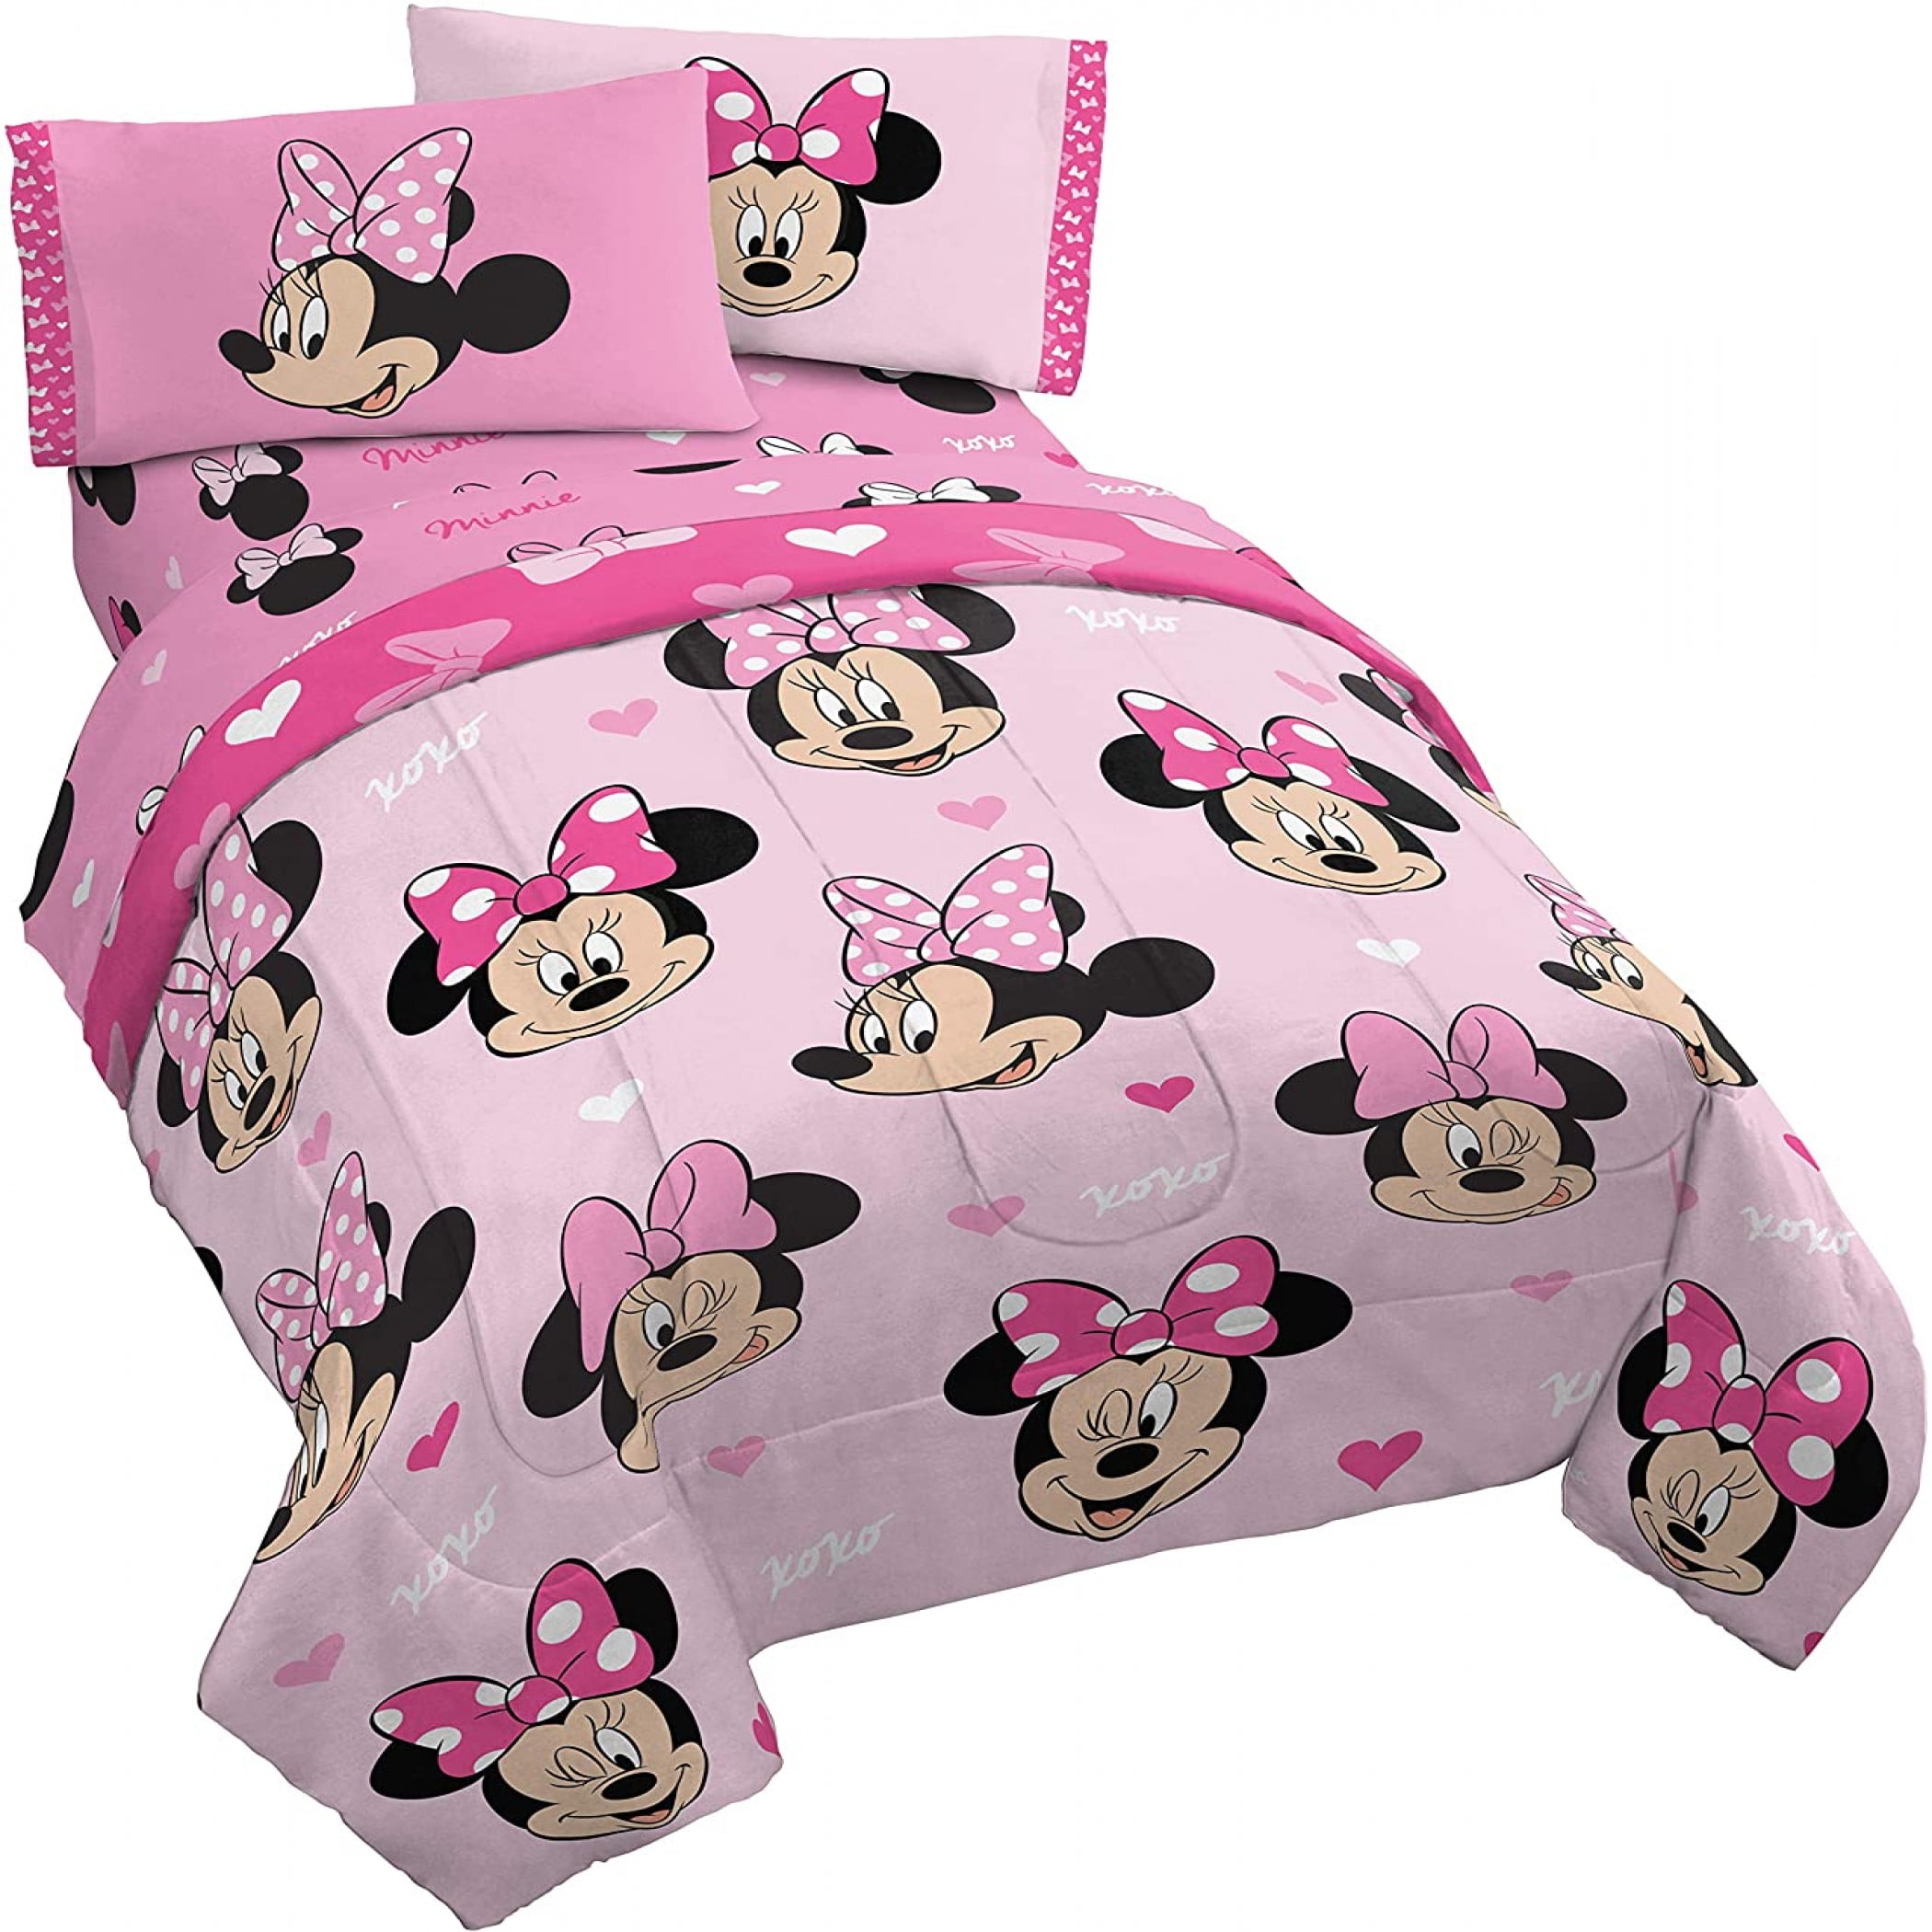 Full Bed Sheets 1 Square Single Minnie Colors 